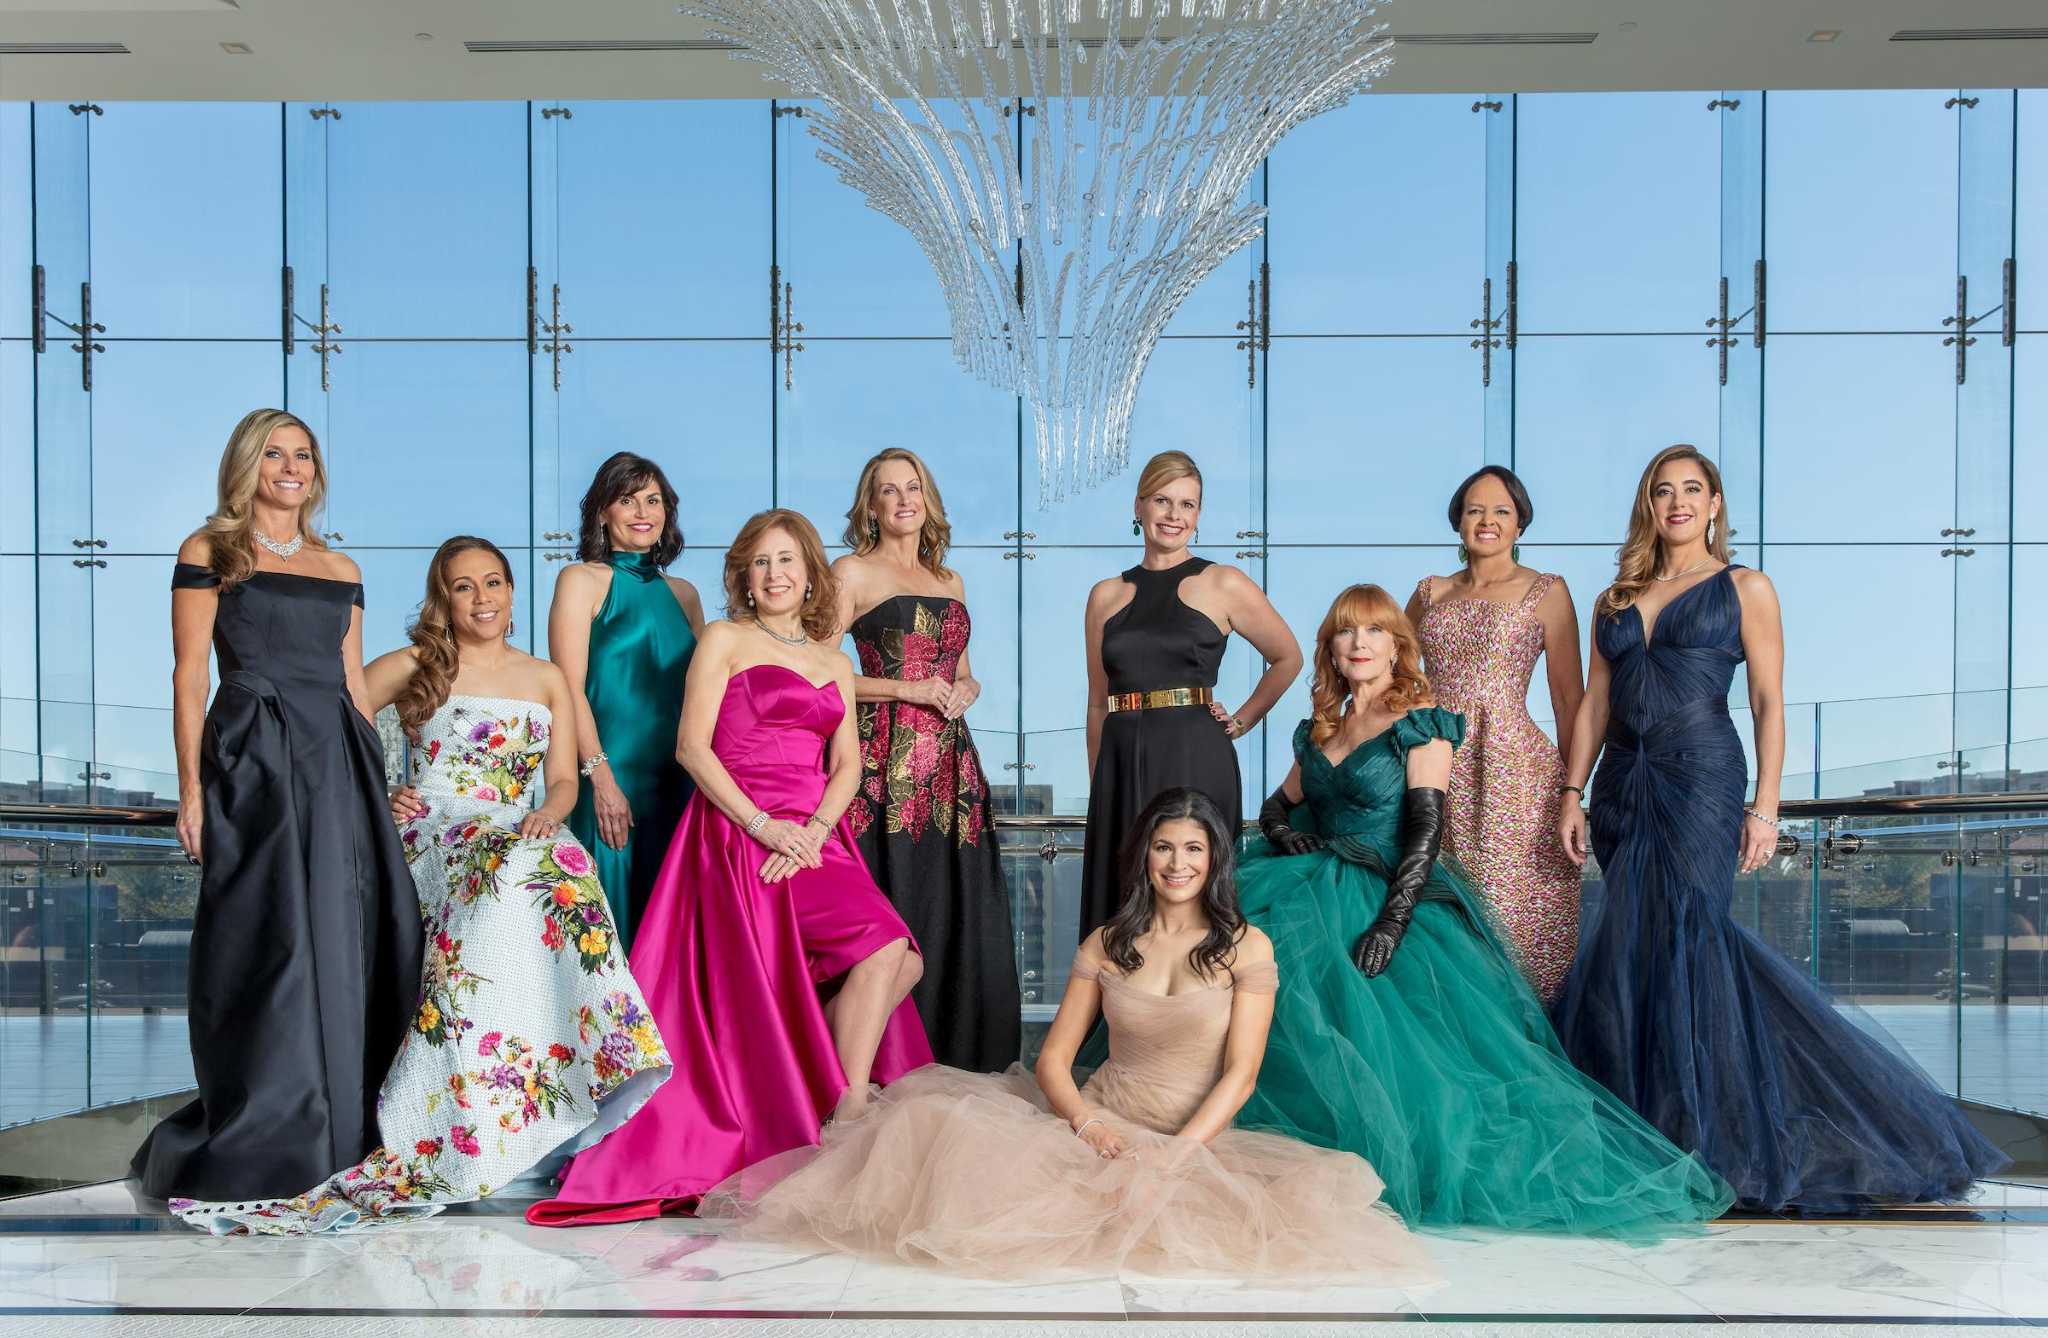 Meet the 2019 Houston Chronicle Best Dressed Honorees